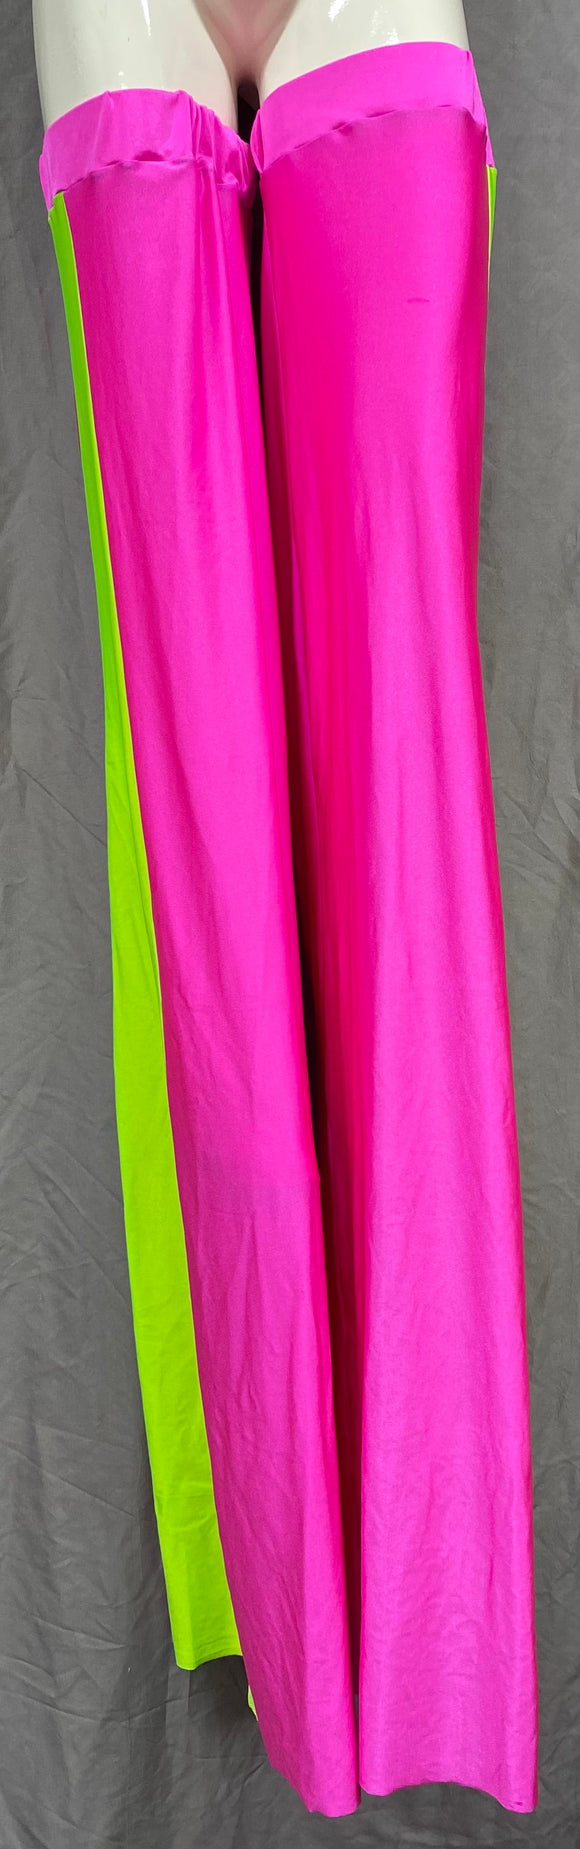 Stilt Covers - Neon Pink with Green 56.5